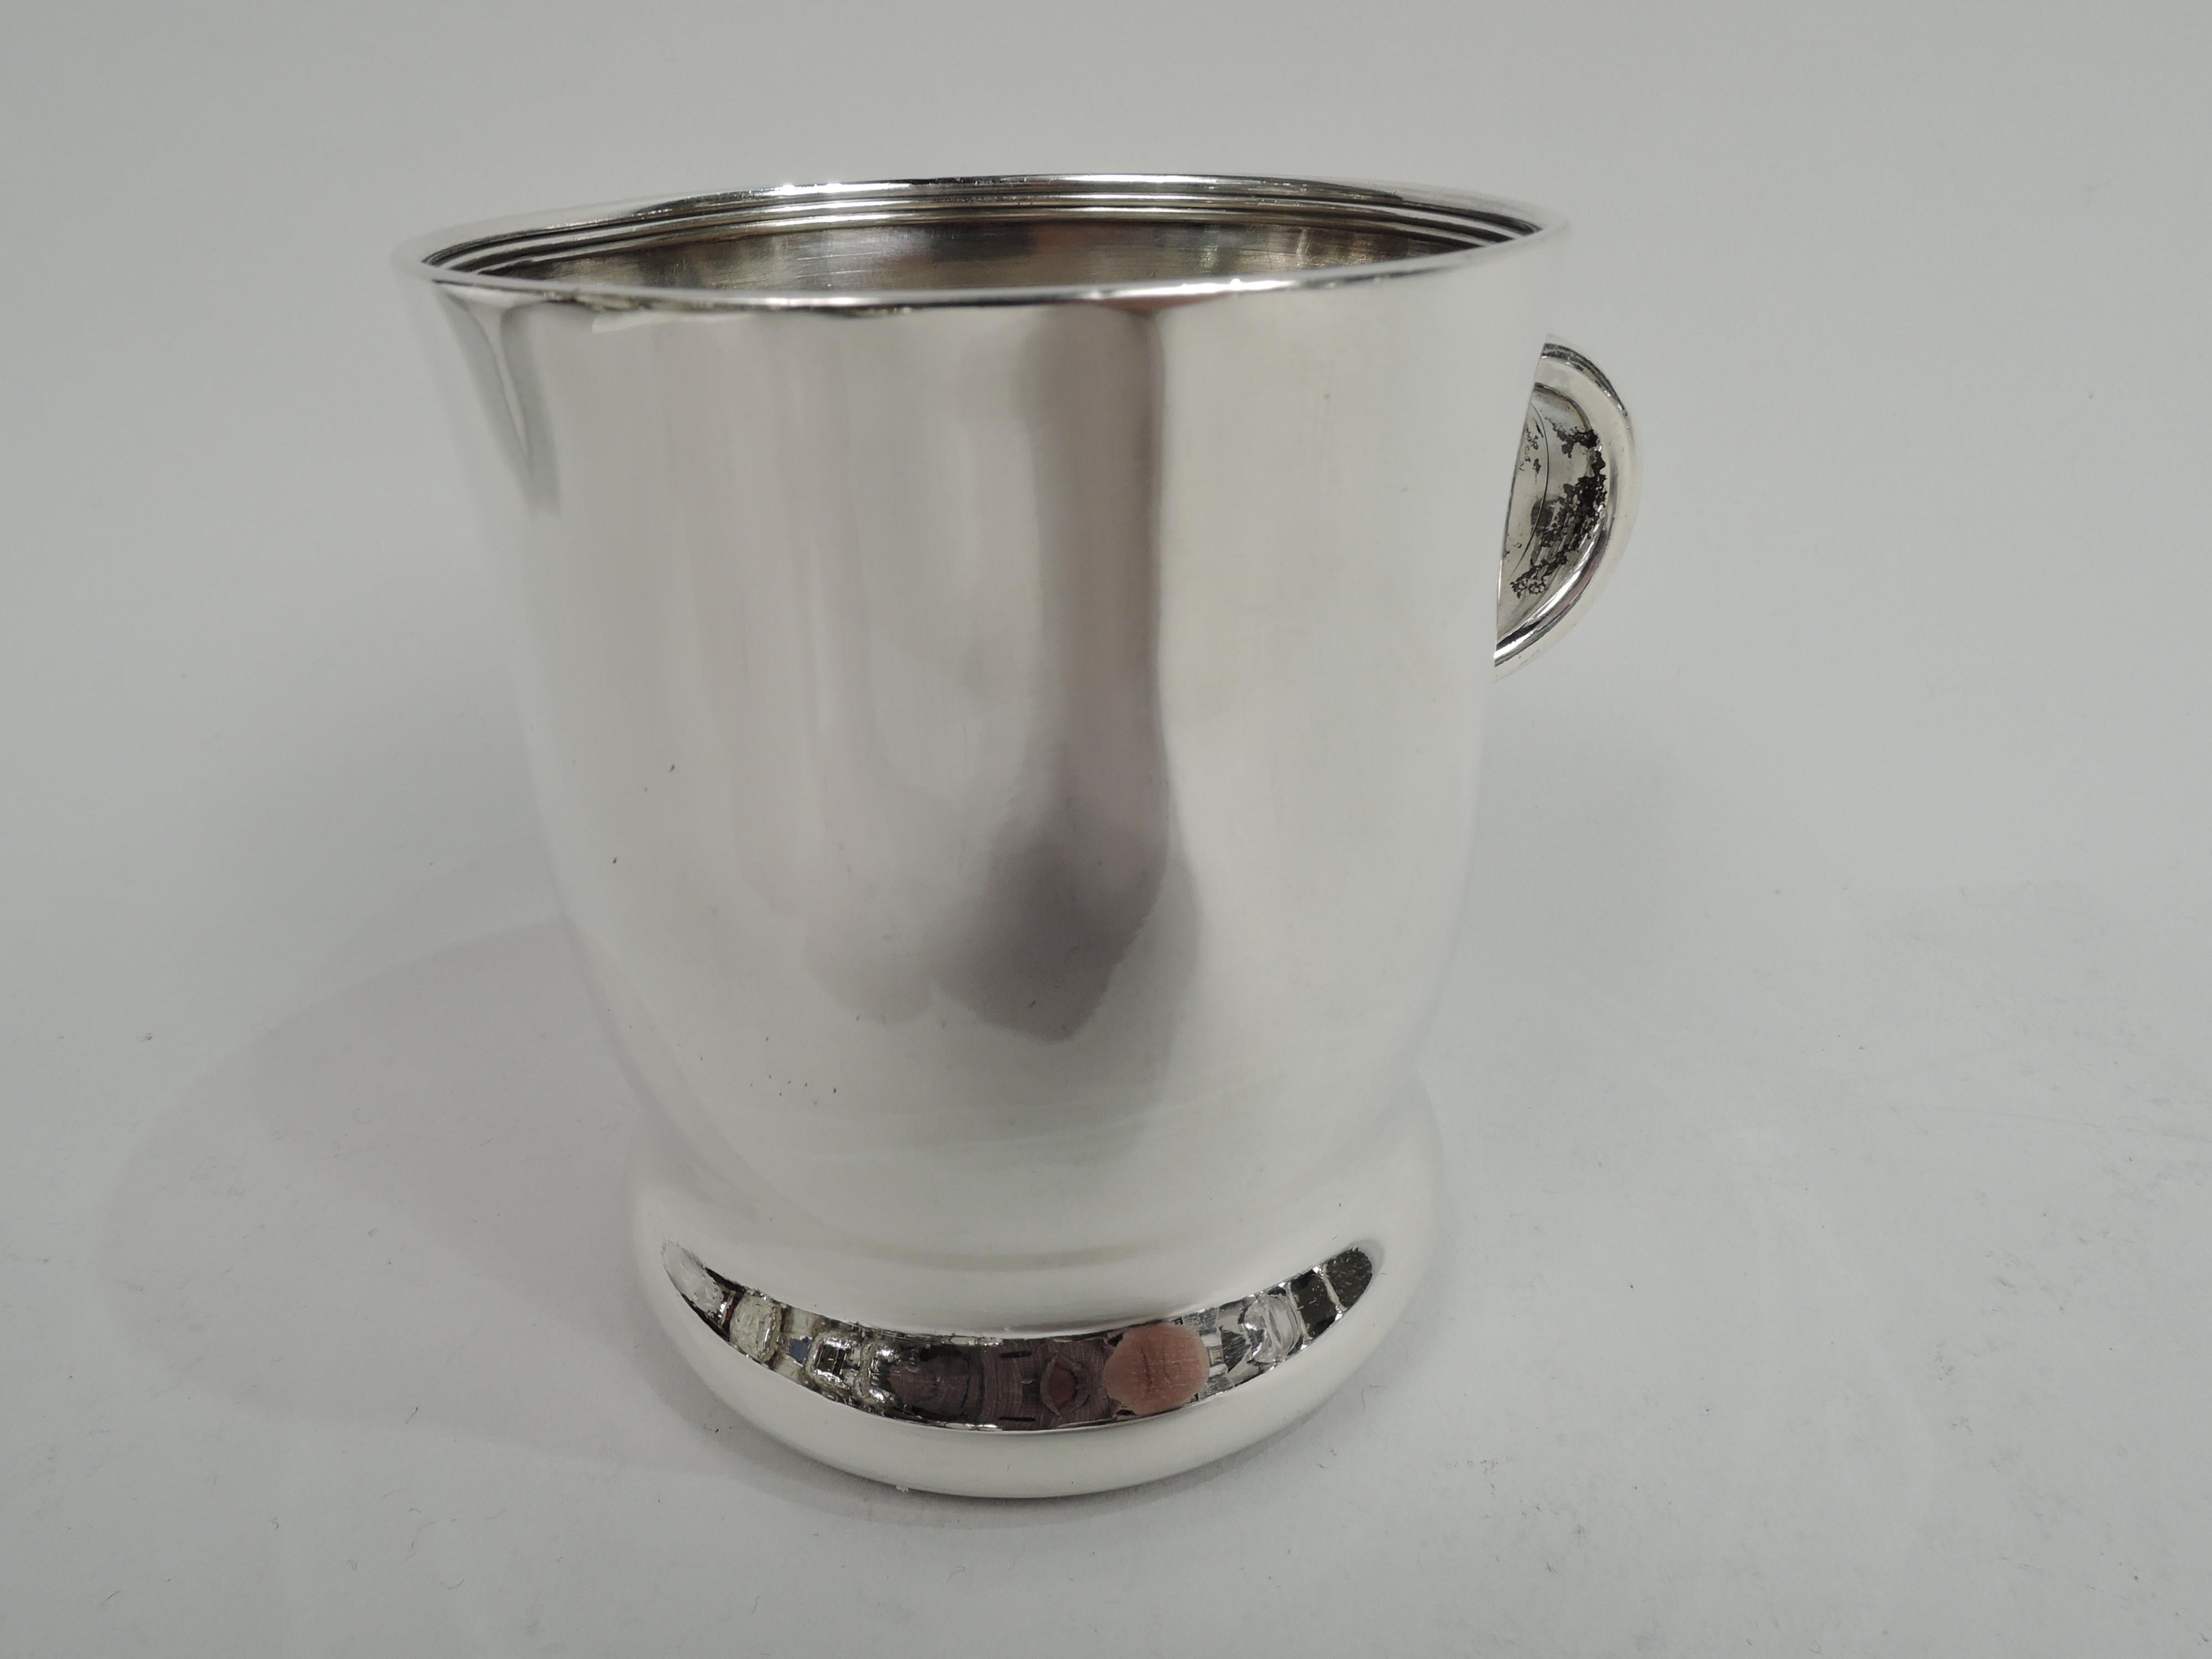 Victorian Classical sterling silver baby cup. Made by Tiffany & Co. in New York. Gently curved sides and concave bottom. Small c-scroll handle with outsized leaf mounts. Lots of room for engraving. Fully marked including maker’s stamp, pattern no.